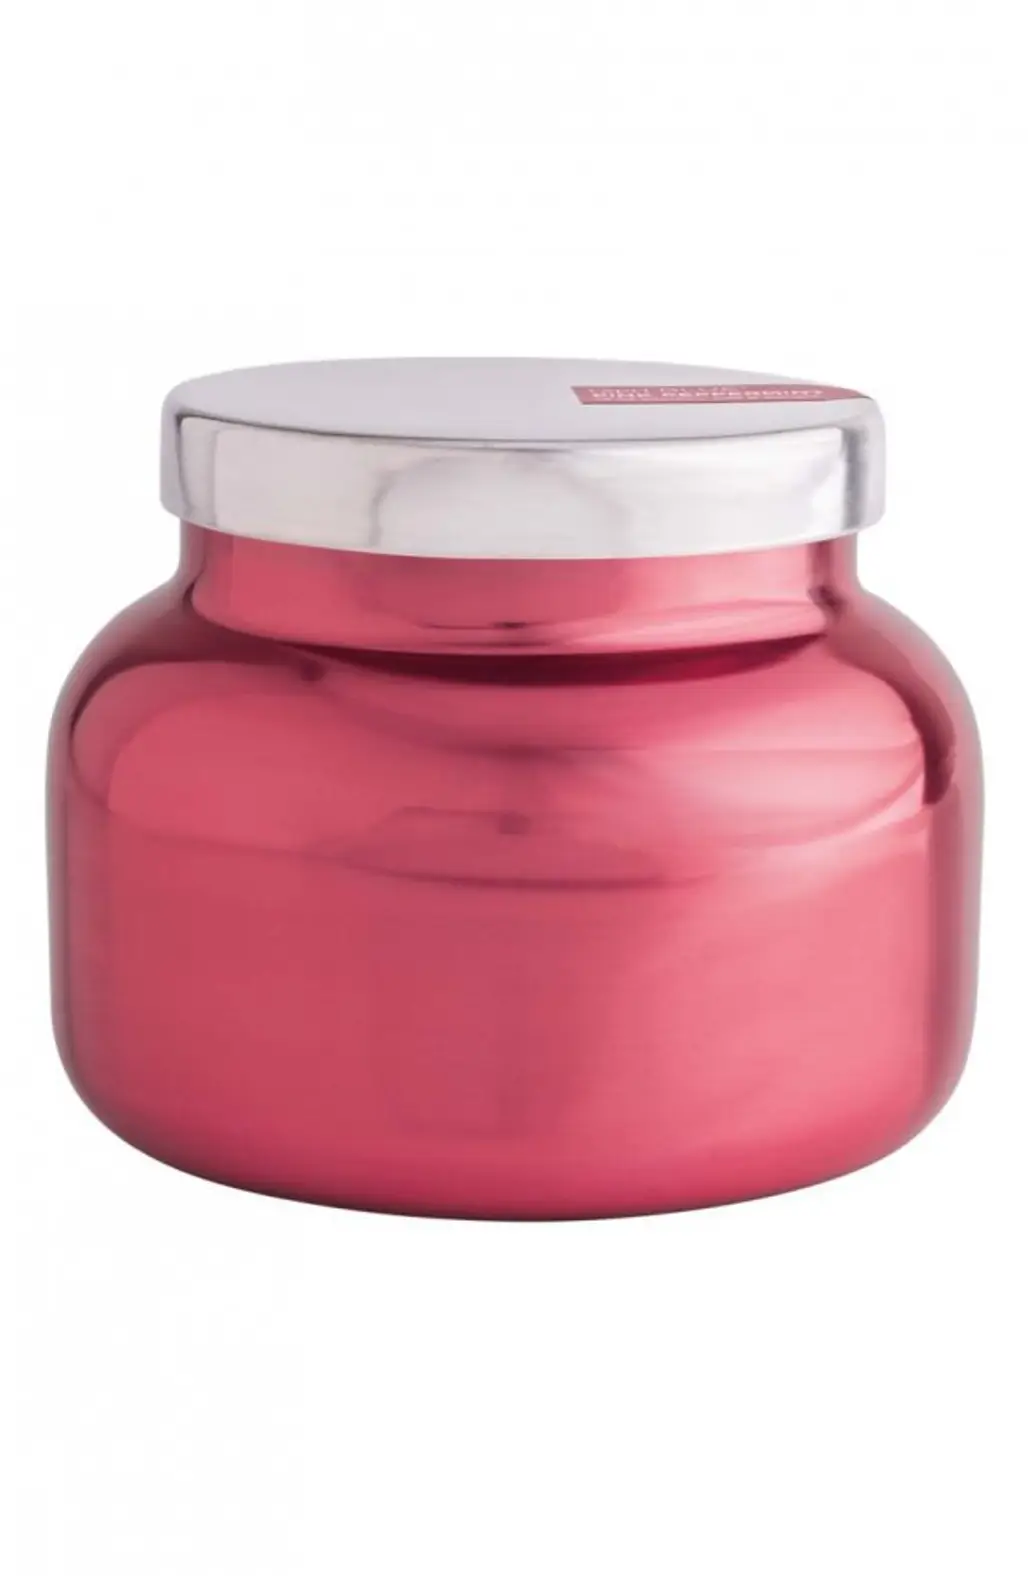 product, lid, product, product design, magenta,